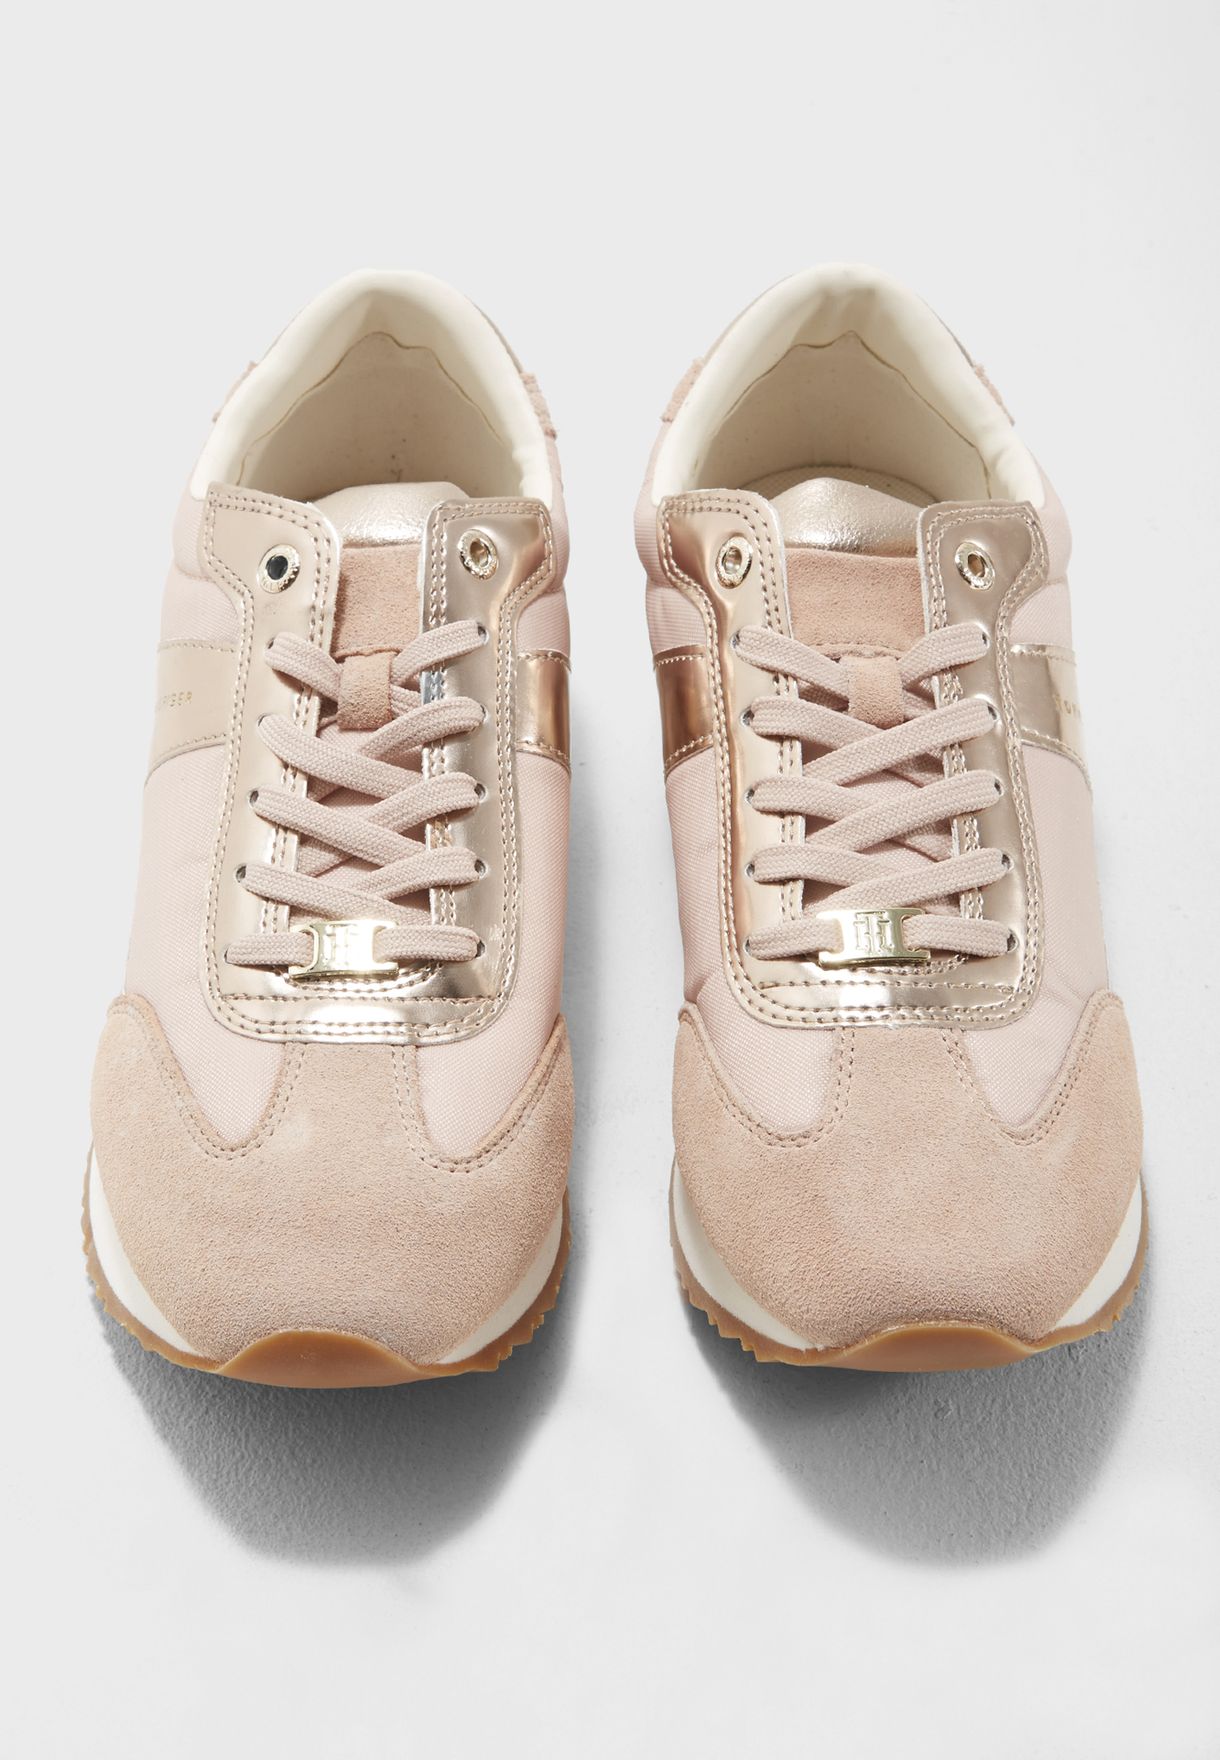 tommy hilfiger rose gold sneakers